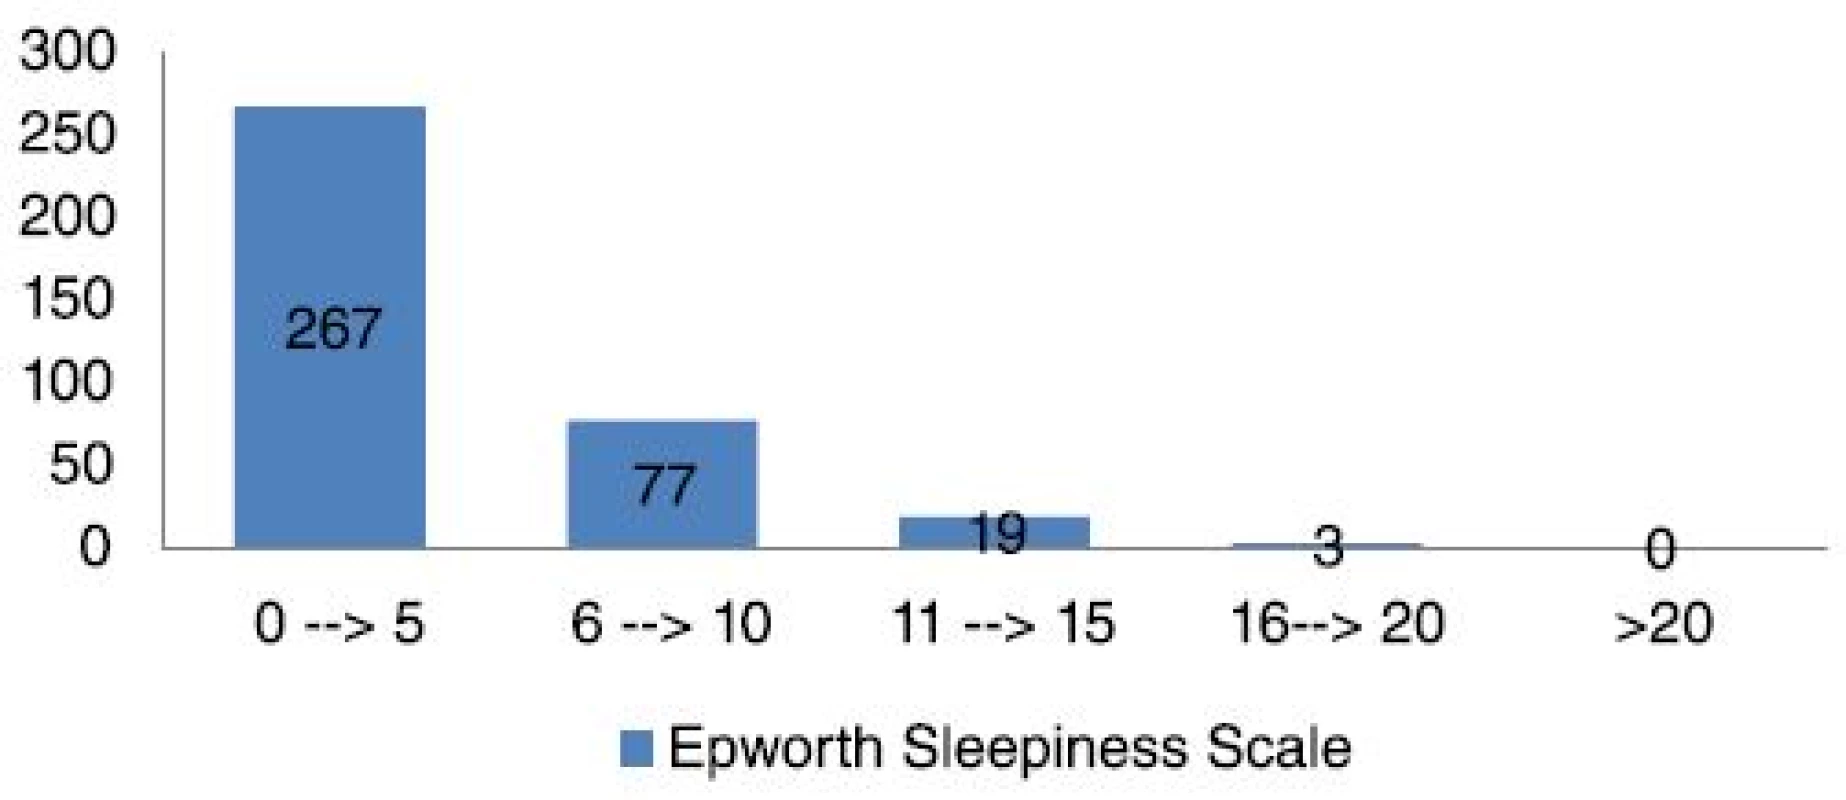 Epworth Sleepiness Scale values. Distribution of Epworth Sleepiness Scale scores in the 366 patients screened are shown in the following figure